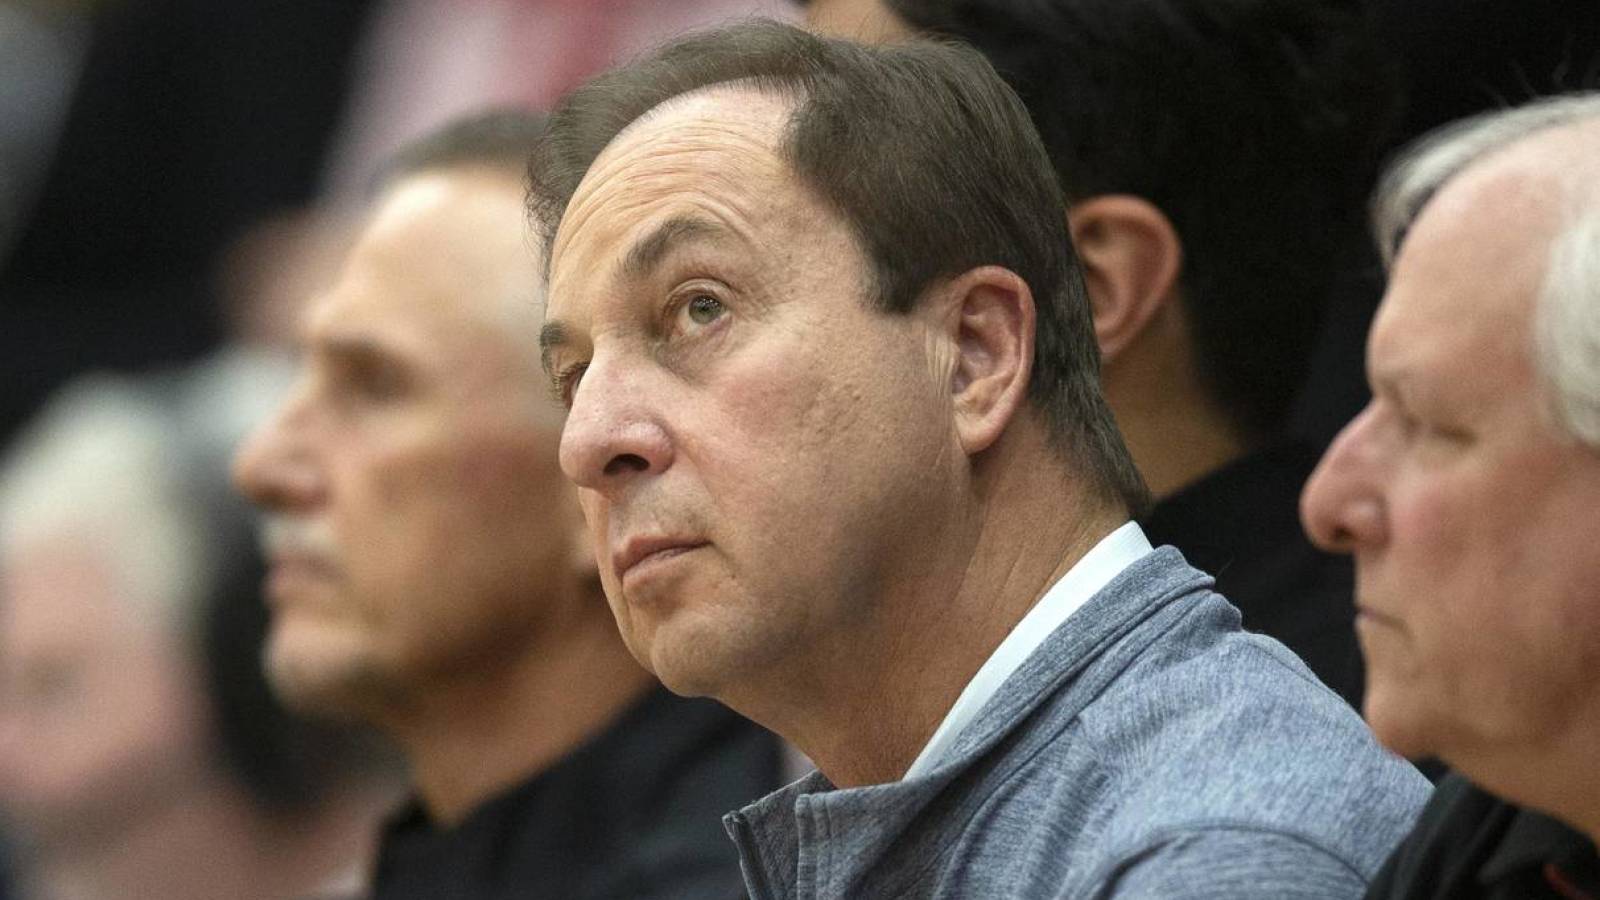 Warriors owner Joe Lacob after Klay Thompson injury: ‘We’re not tanking’